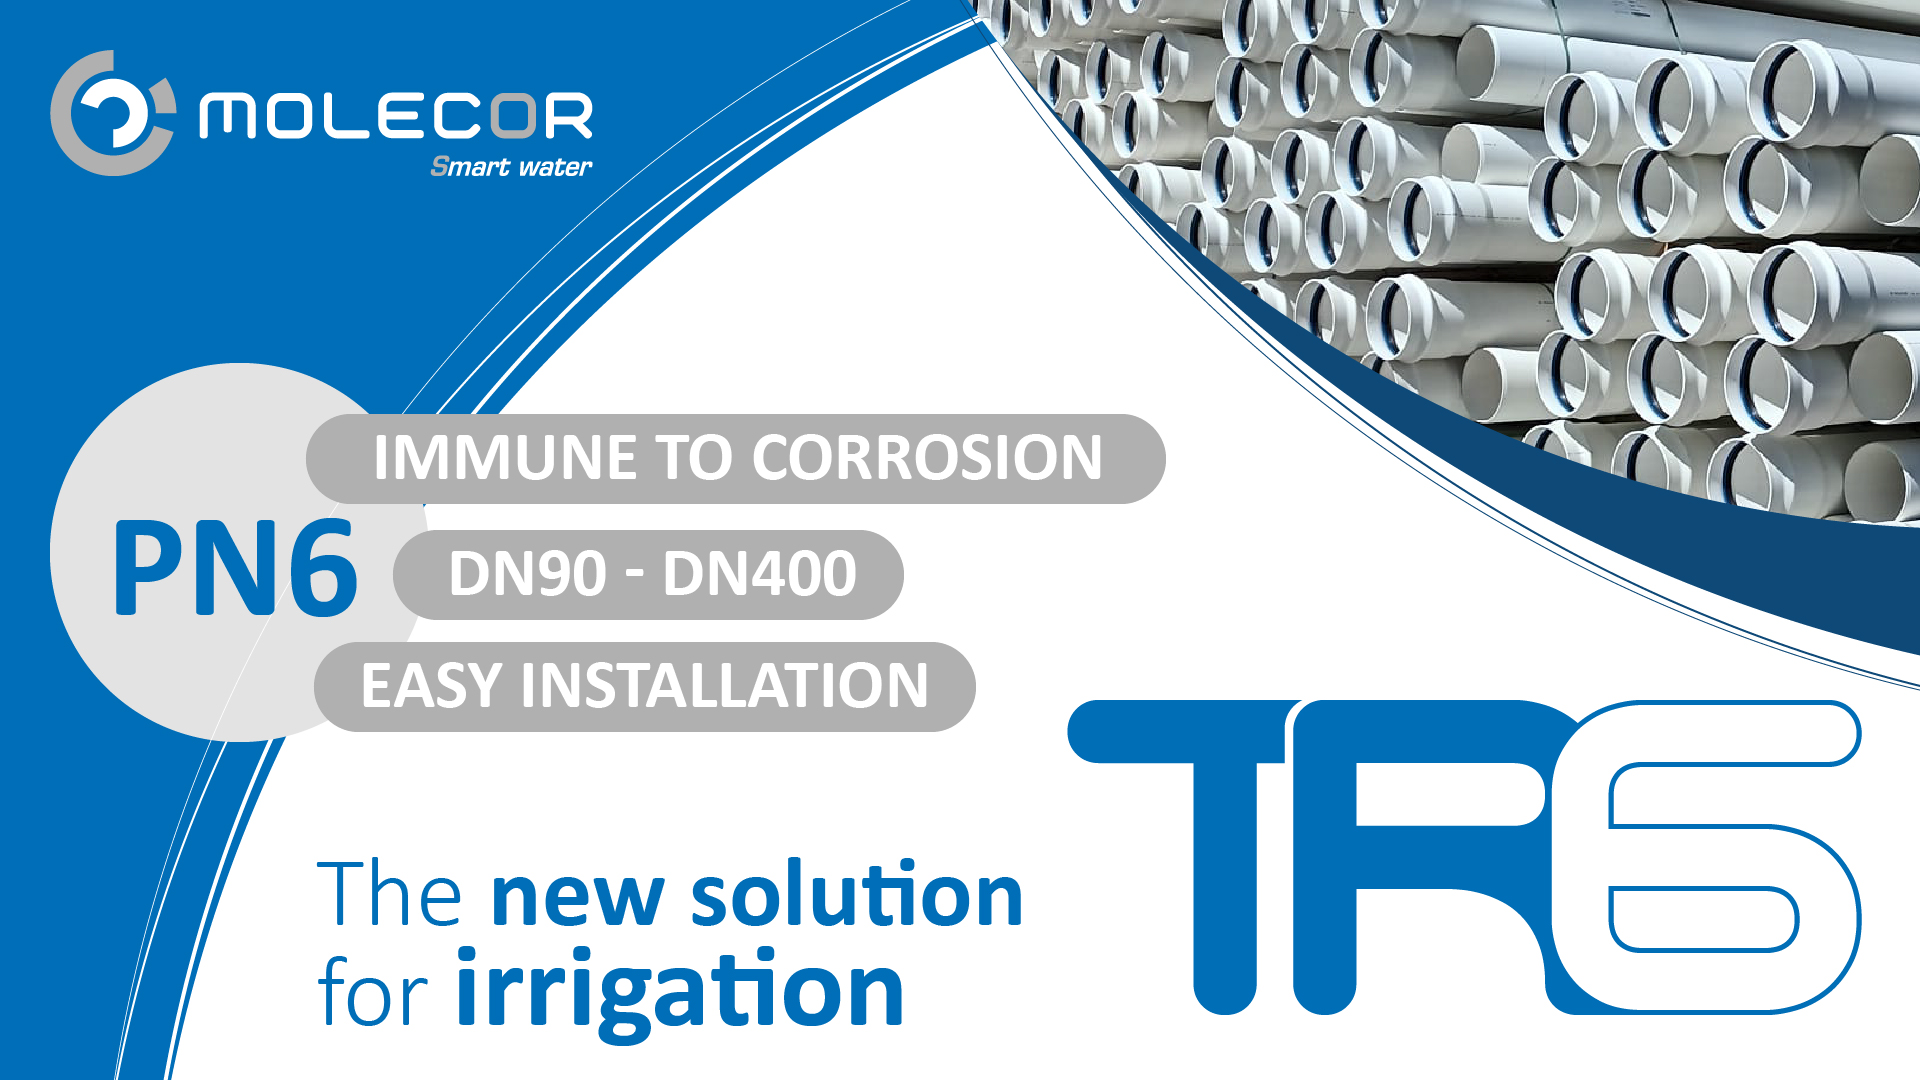 TR6®, he new oriented pipe that will revolutionize the irrigation sector.